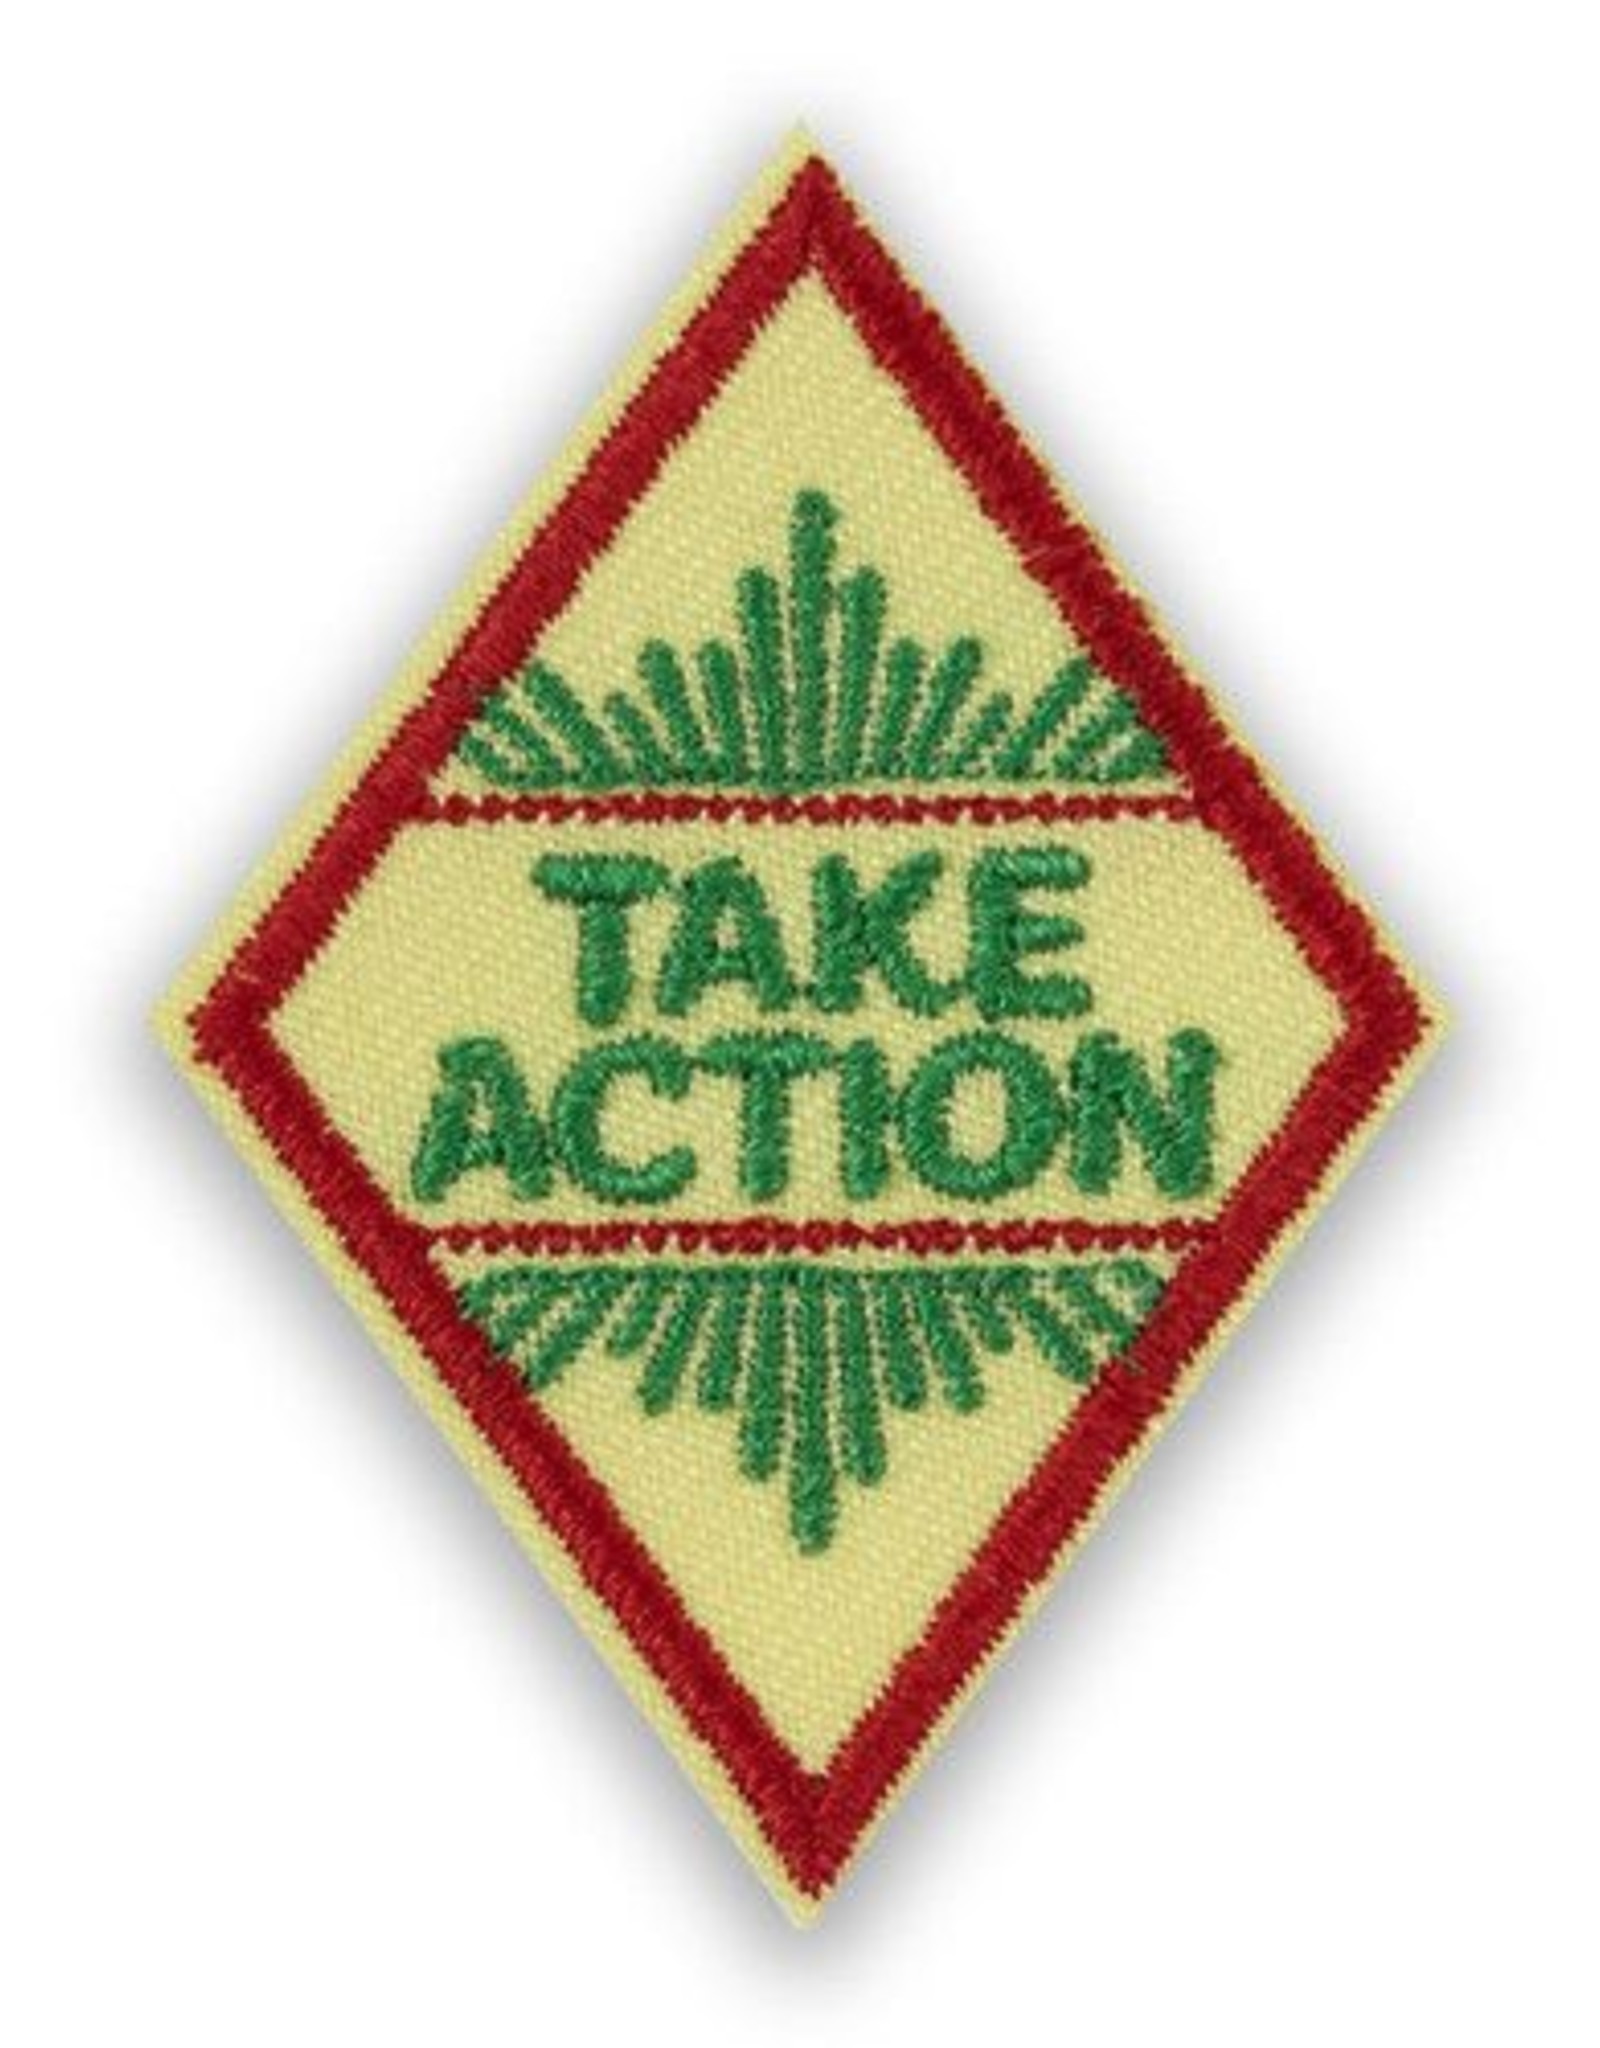 GIRL SCOUTS OF THE USA Cadette Take Action Award Badge